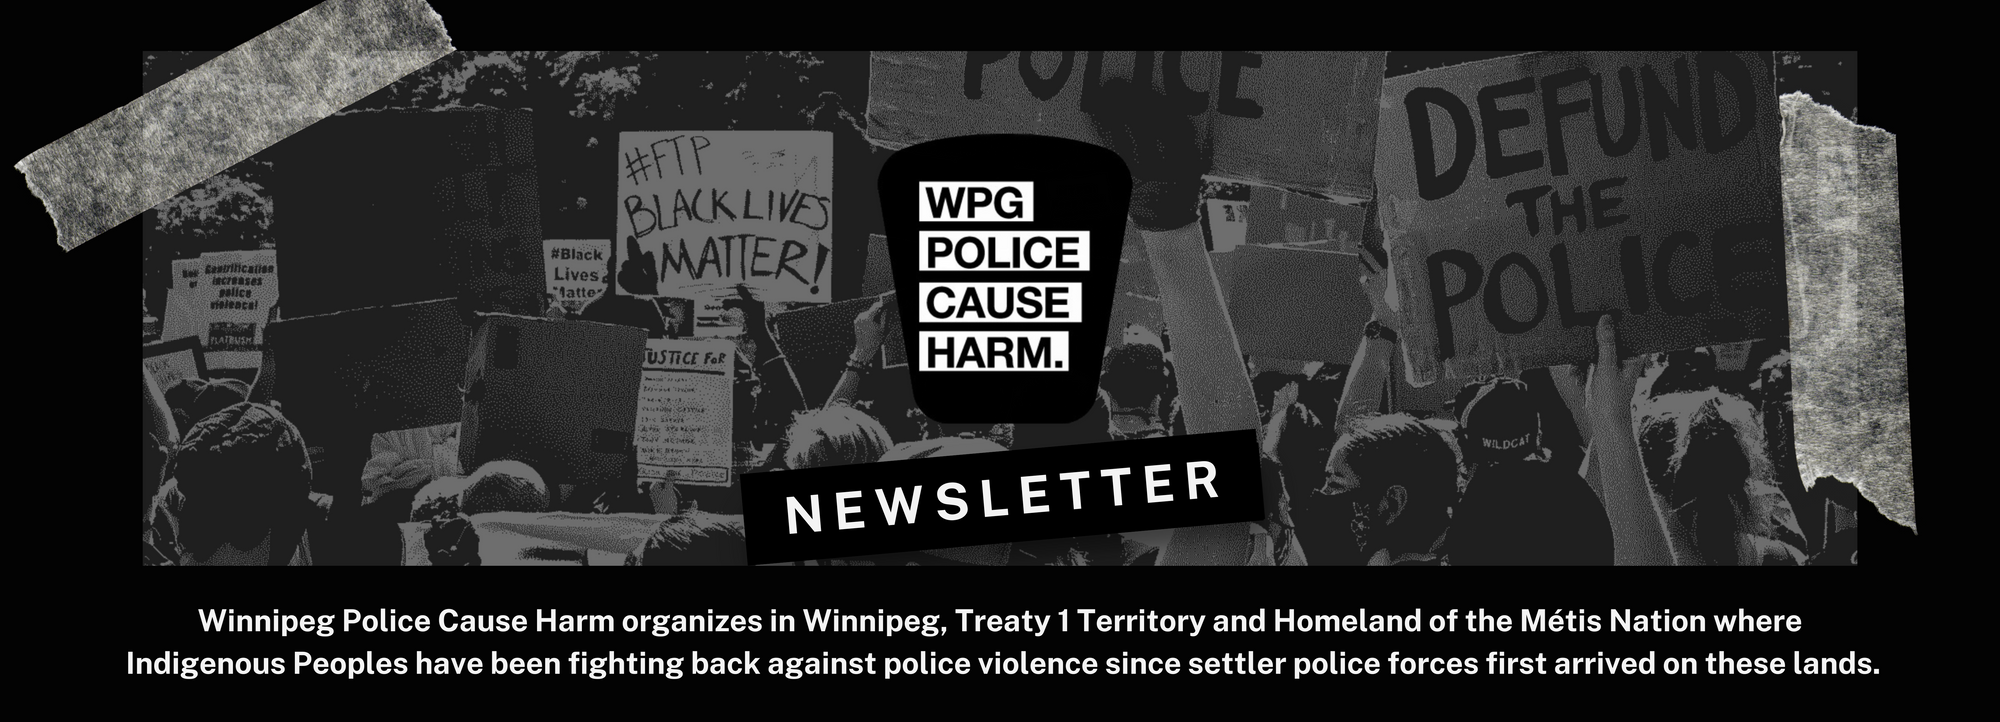 Newsletter banner that has the Winnipeg Police Cause Harm's logo, and a land acknowledgement